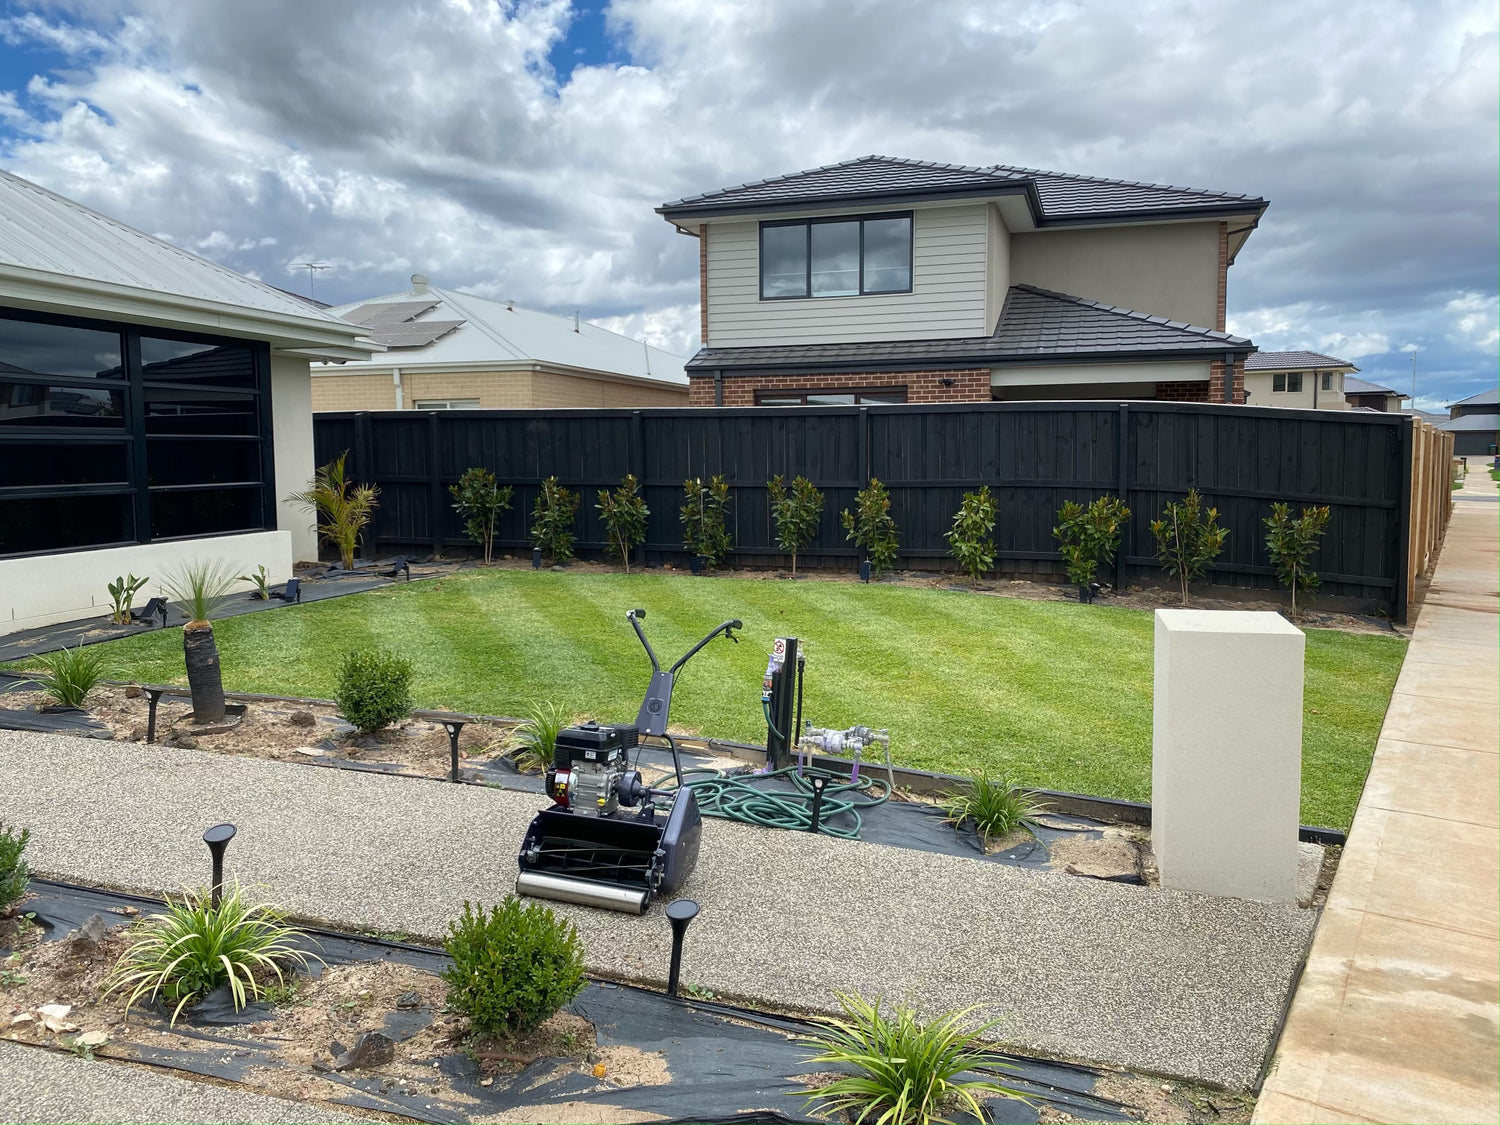 lawn mowing Melbourne, lawn care, lawn care near me, gardening, grounds keeper, weed control, gardener near me, commercial lawn mowing, commercial gardening, commercial lawn care